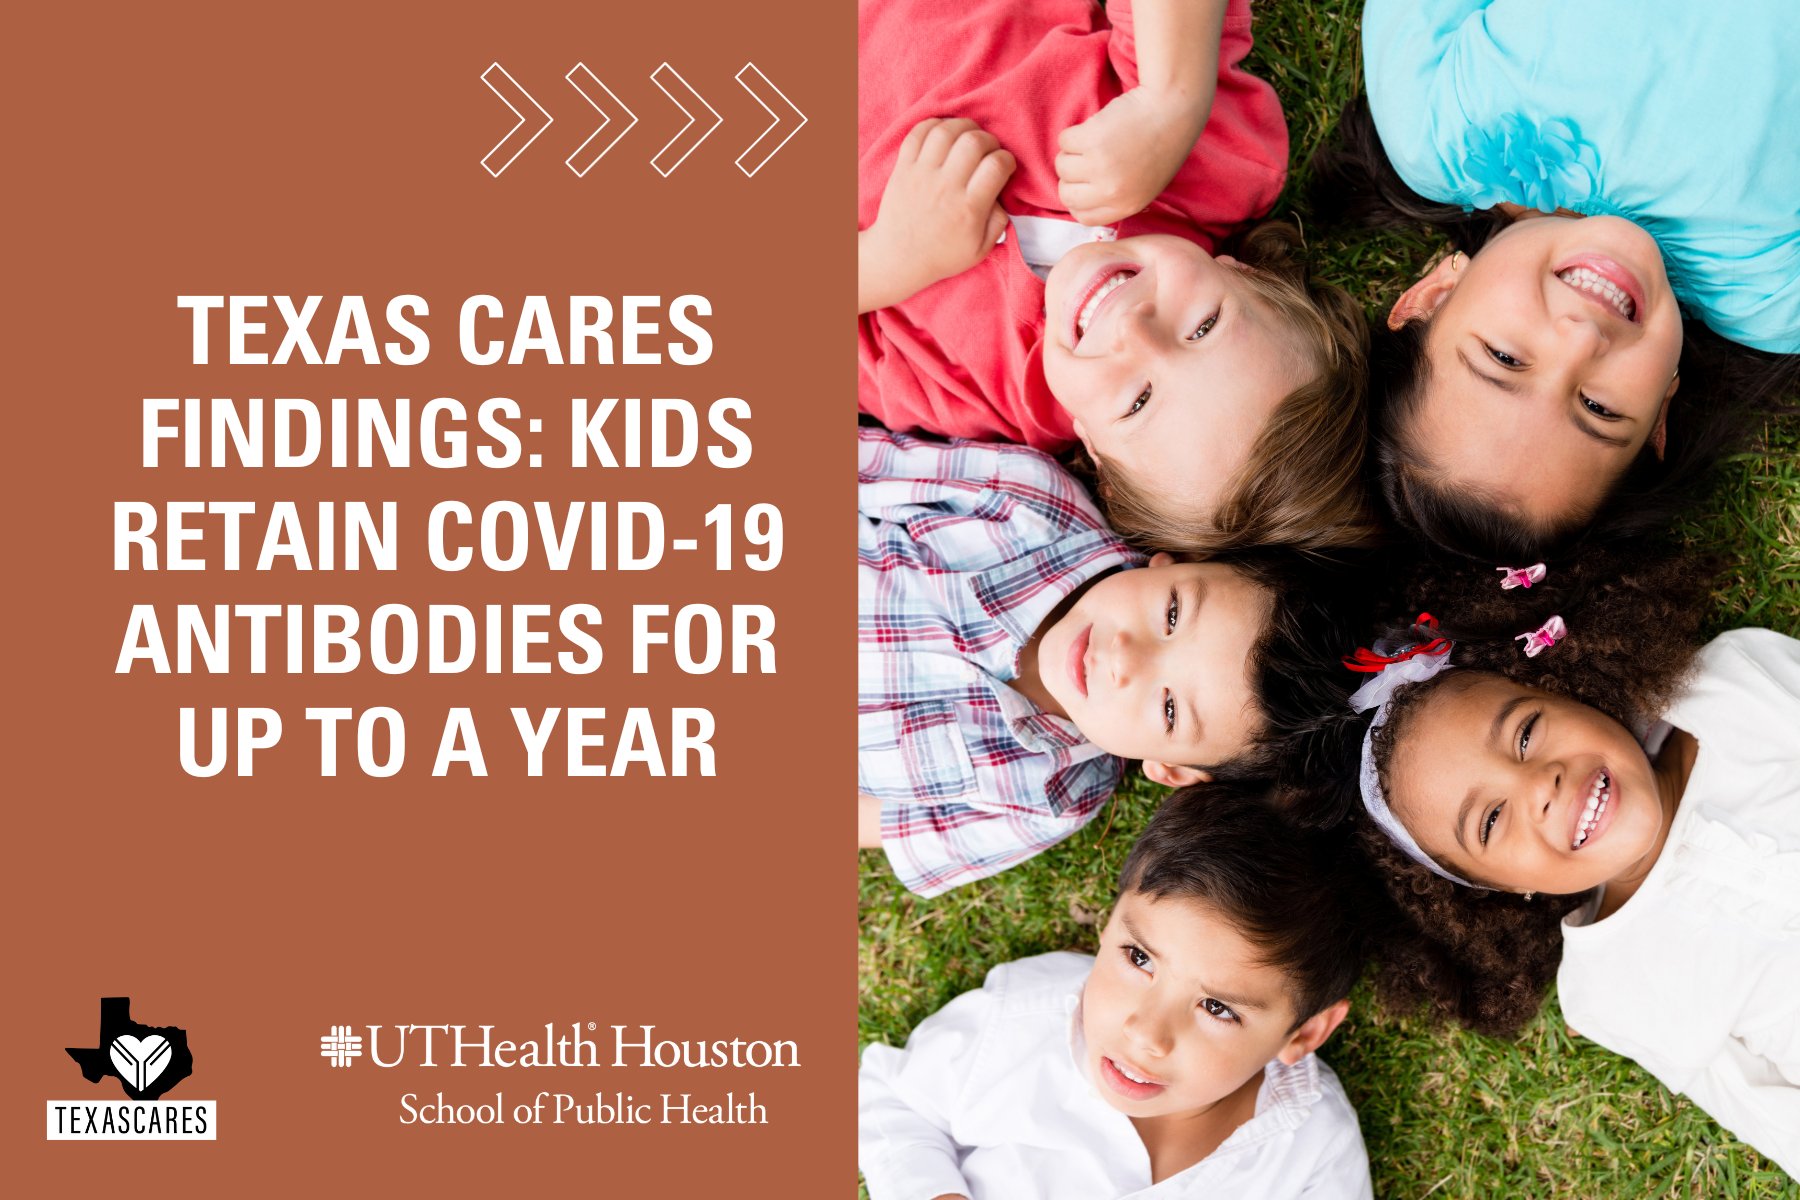 Children retain COVID-19 antibodies for up to a year, according to UTHealth Houston findings